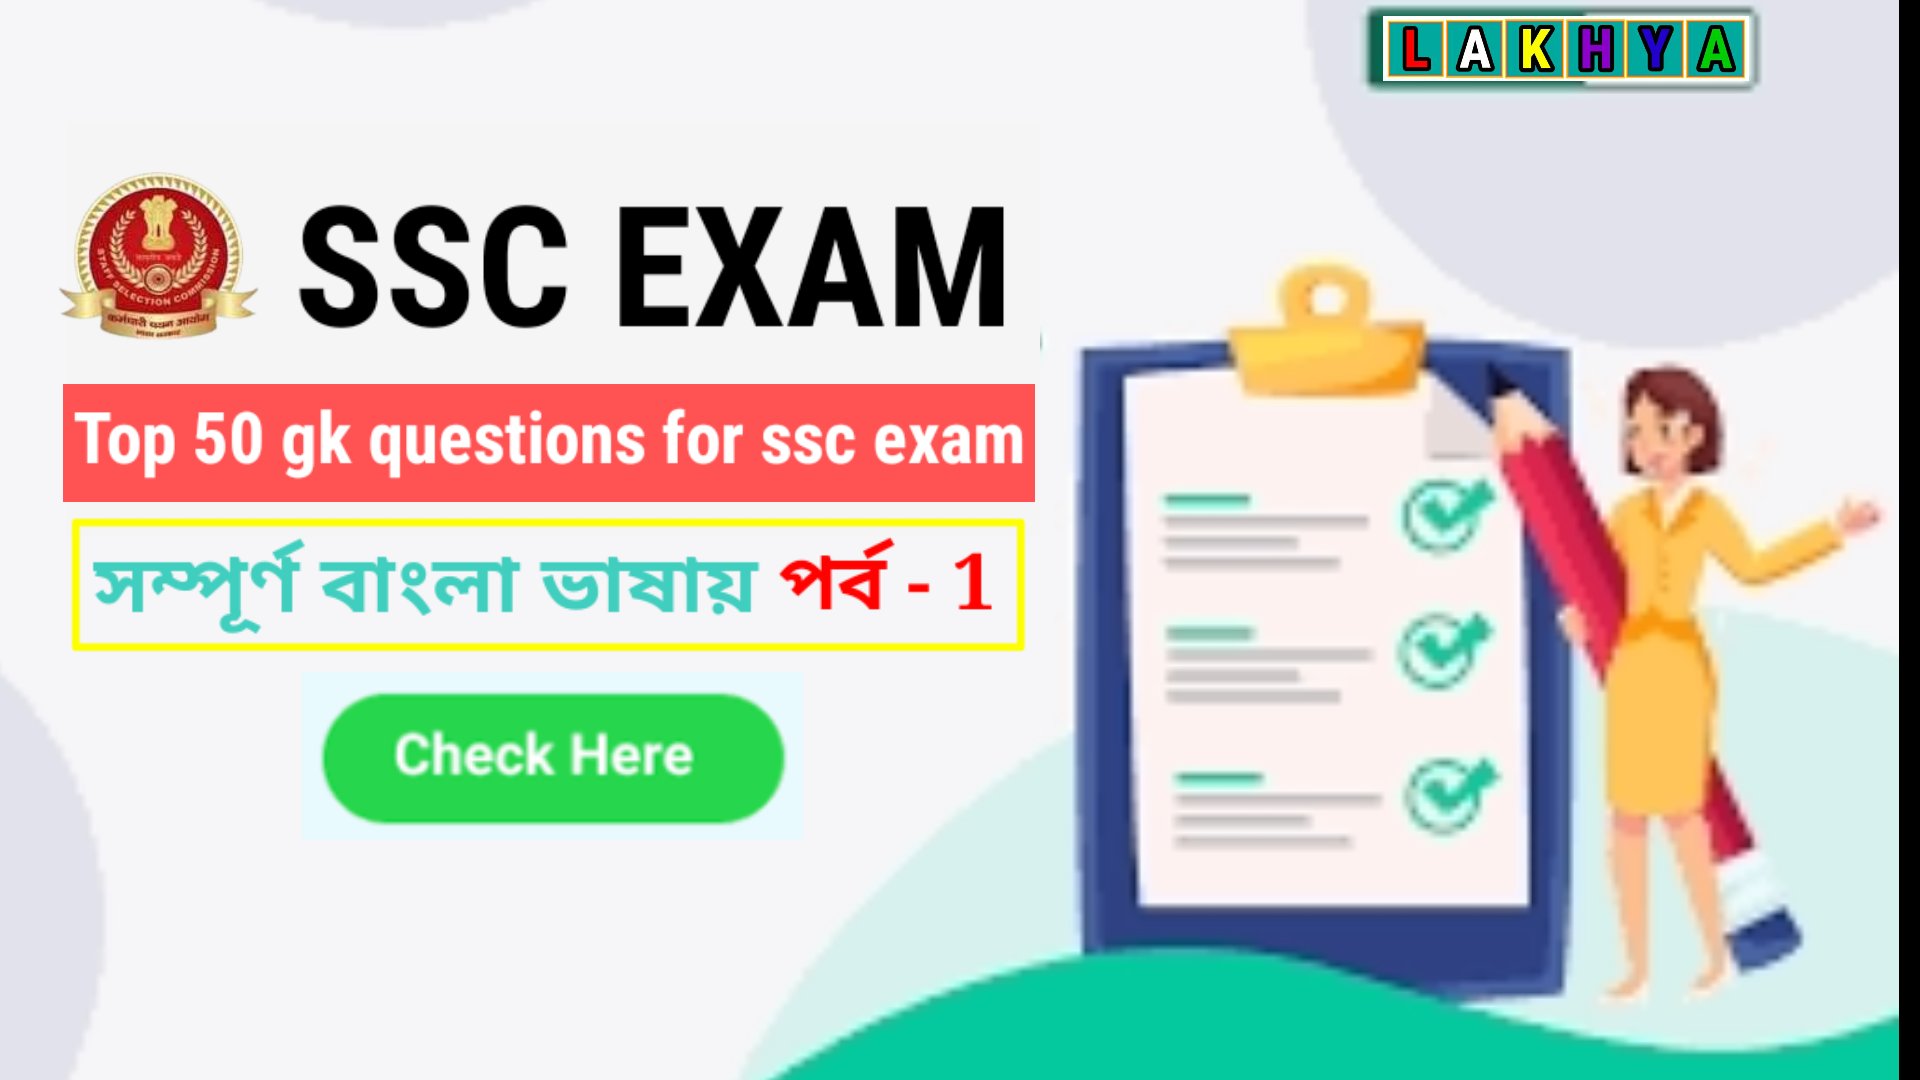 Top 50 GK Questions for SSC Exam in Bengali